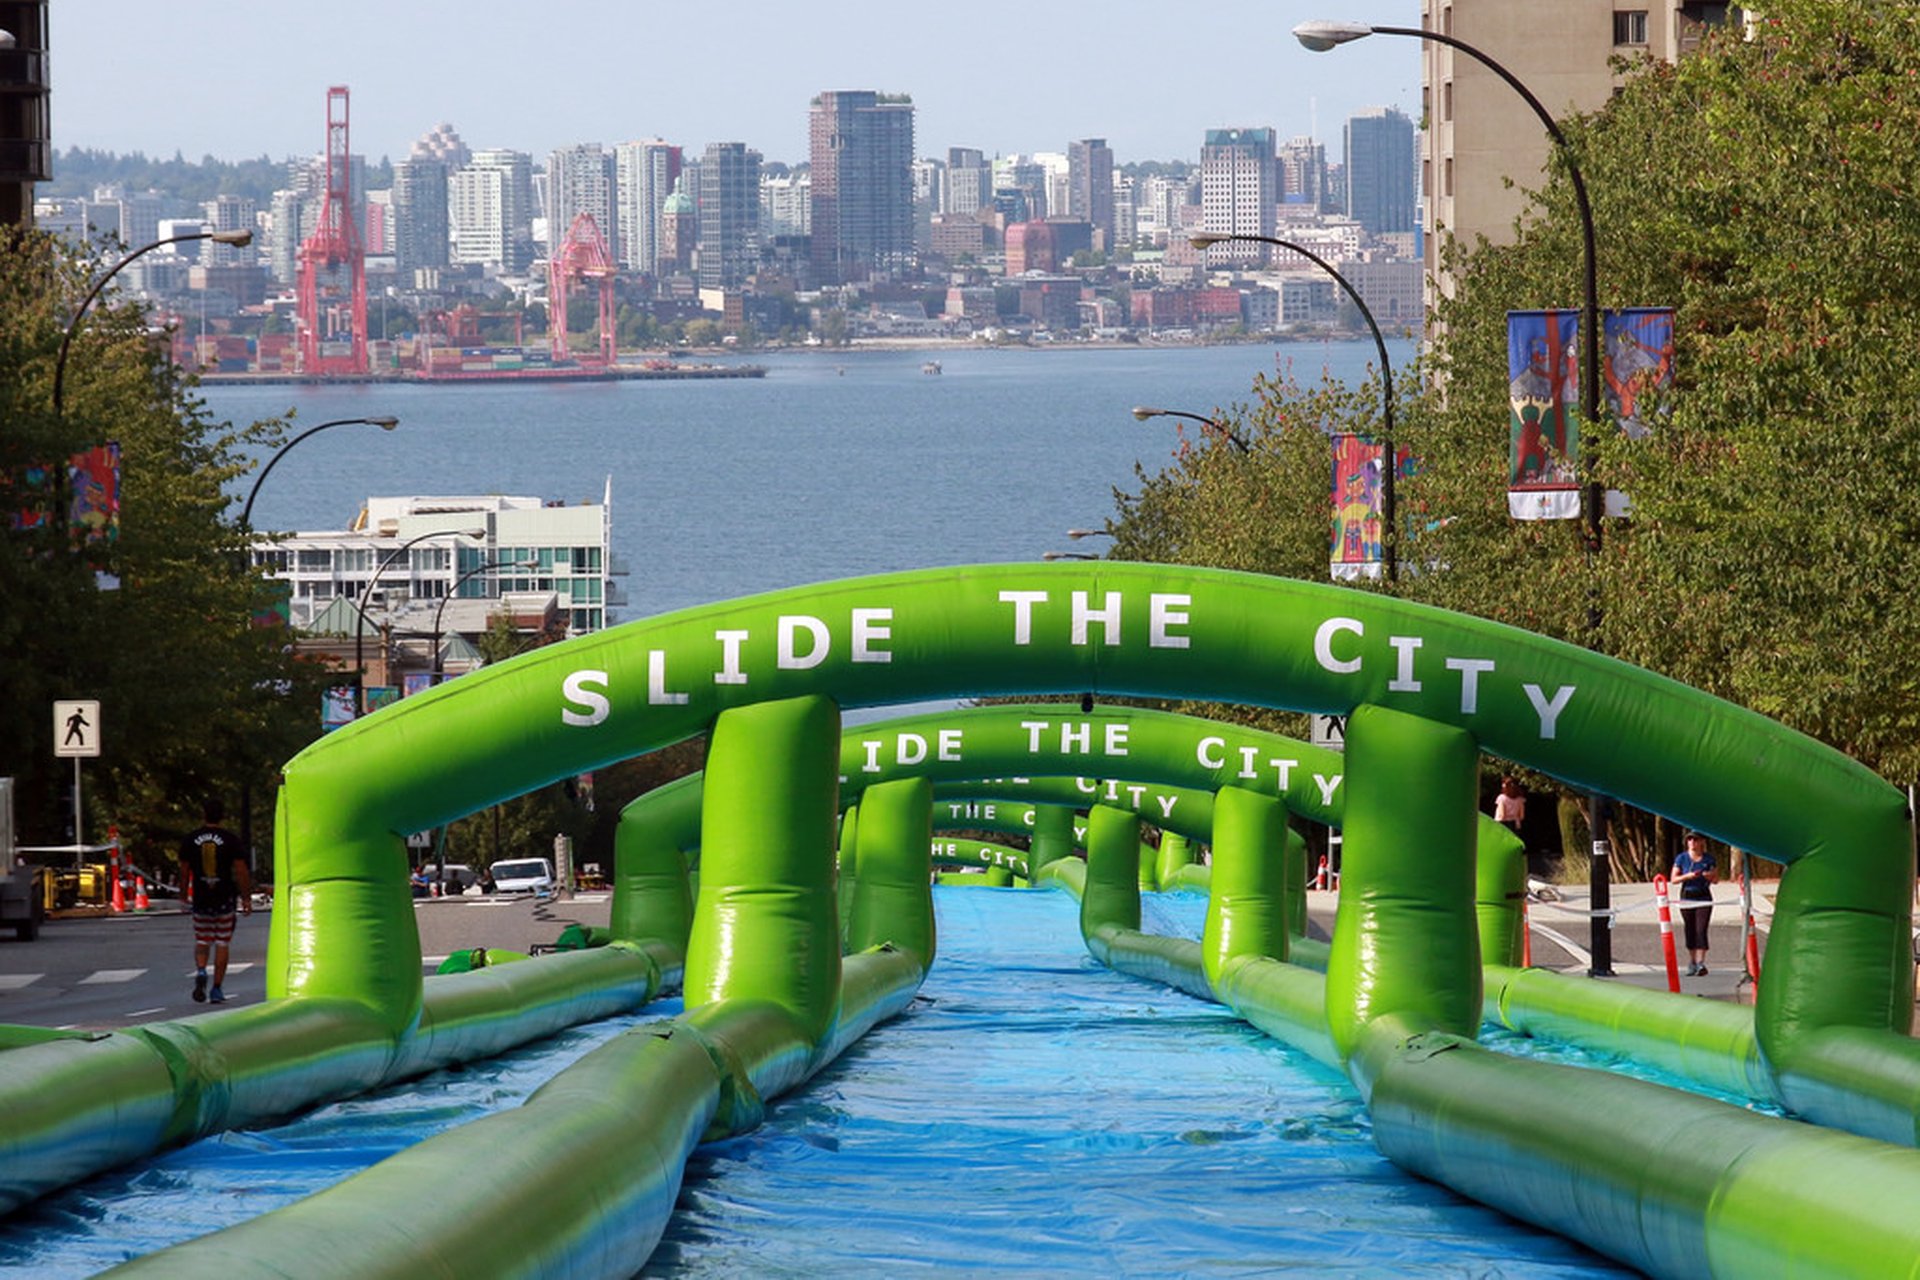 Slide The City, Lower Lonsdale July 13th & 14th, 2019